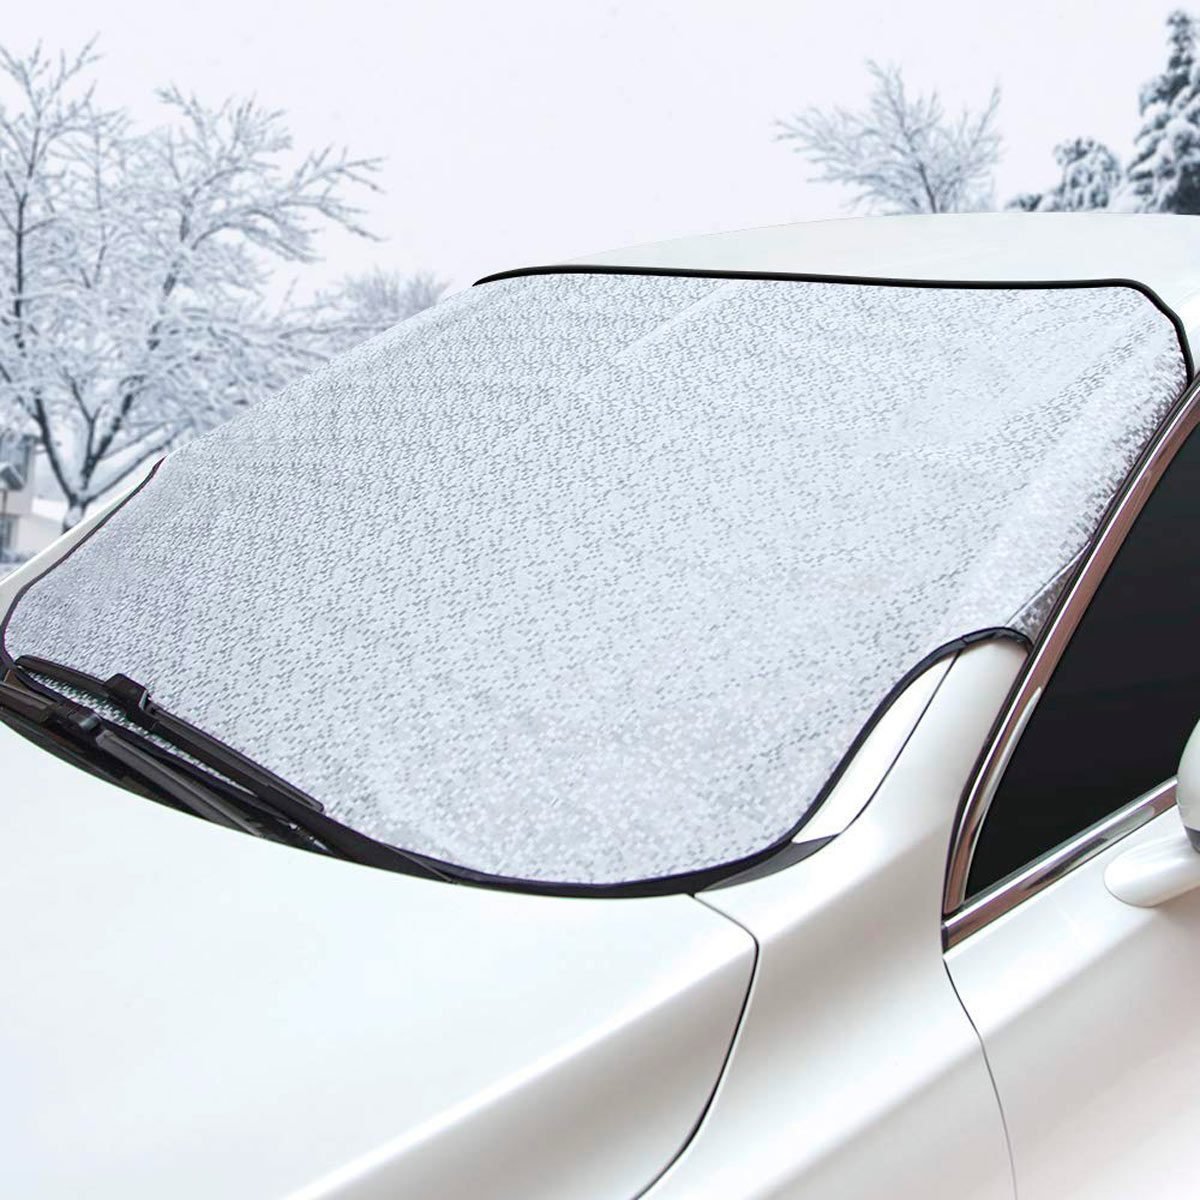 Car Folding Windshield Protect Cover Snow Ice Frost Protector Sun Shield Silver